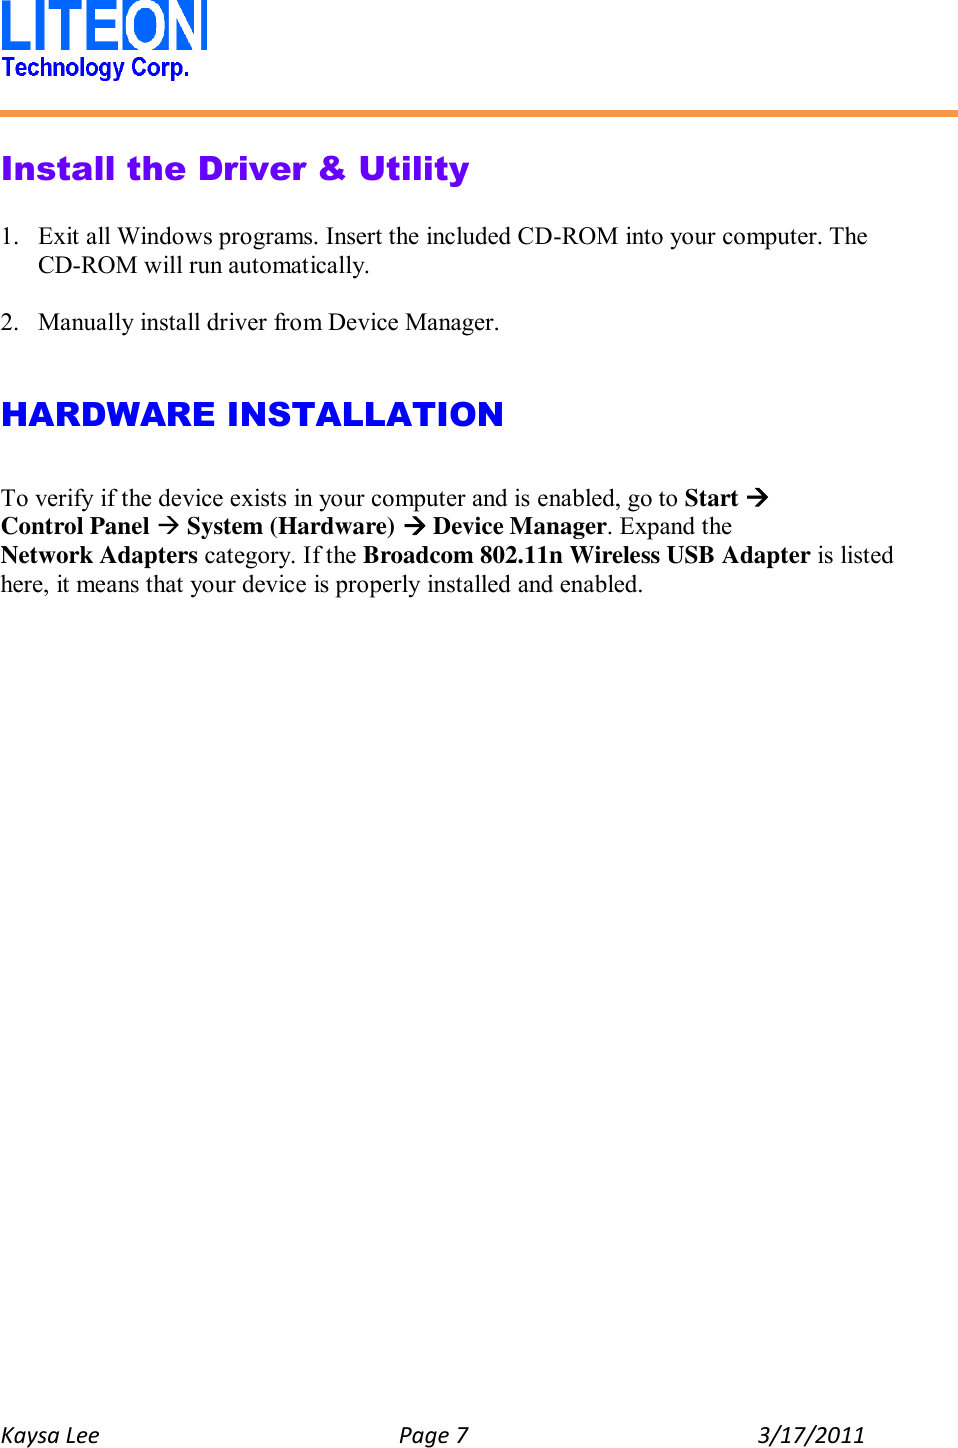   Kaysa Lee  Page 7  3/17/2011    Install the Driver &amp; Utility  1. Exit all Windows programs. Insert the included CD-ROM into your computer. The CD-ROM will run automatically.  2. Manually install driver from Device Manager.   HARDWARE INSTALLATION  To verify if the device exists in your computer and is enabled, go to Start  Control Panel  System (Hardware)  Device Manager. Expand the Network Adapters category. If the Broadcom 802.11n Wireless USB Adapter is listed here, it means that your device is properly installed and enabled.    